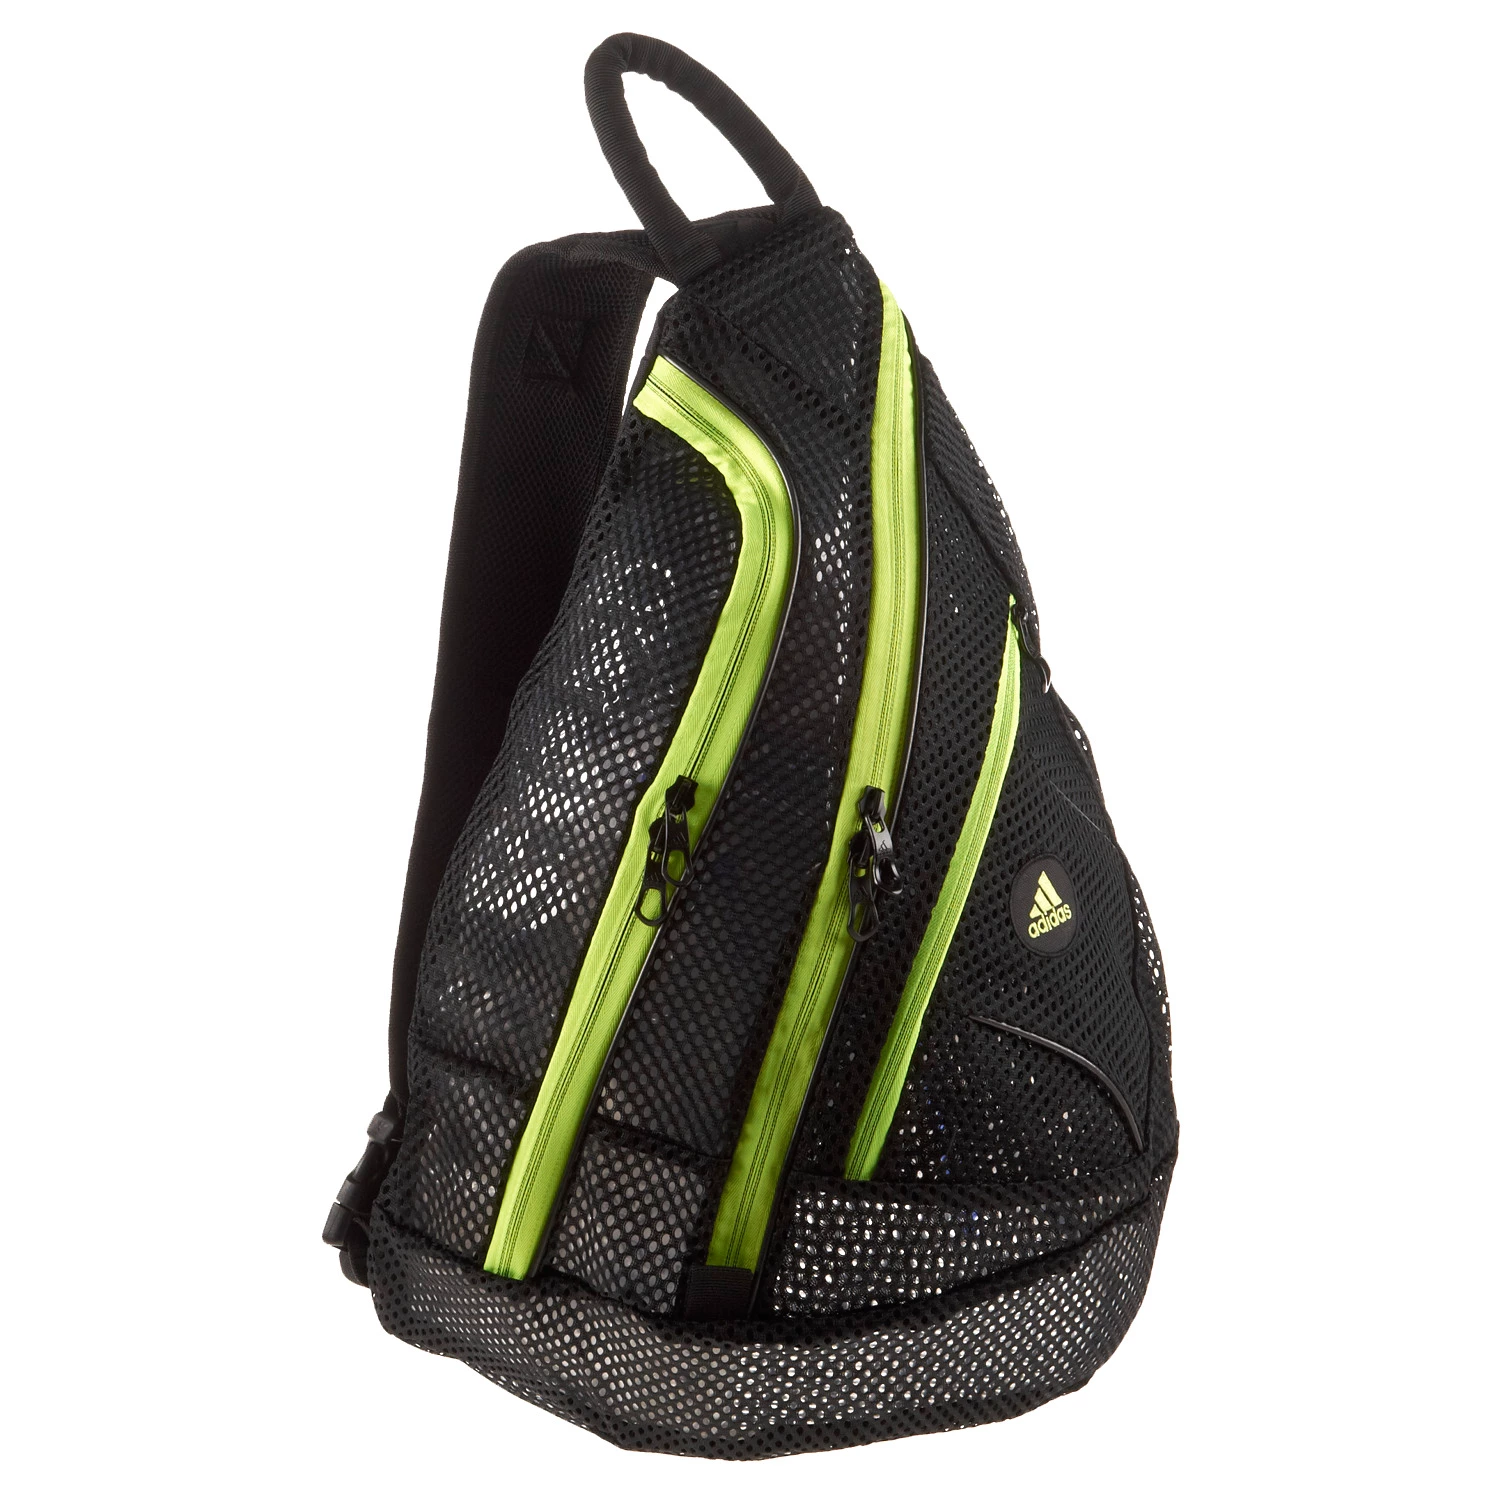 adidas single strap backpack, OFF 70%,Buy!